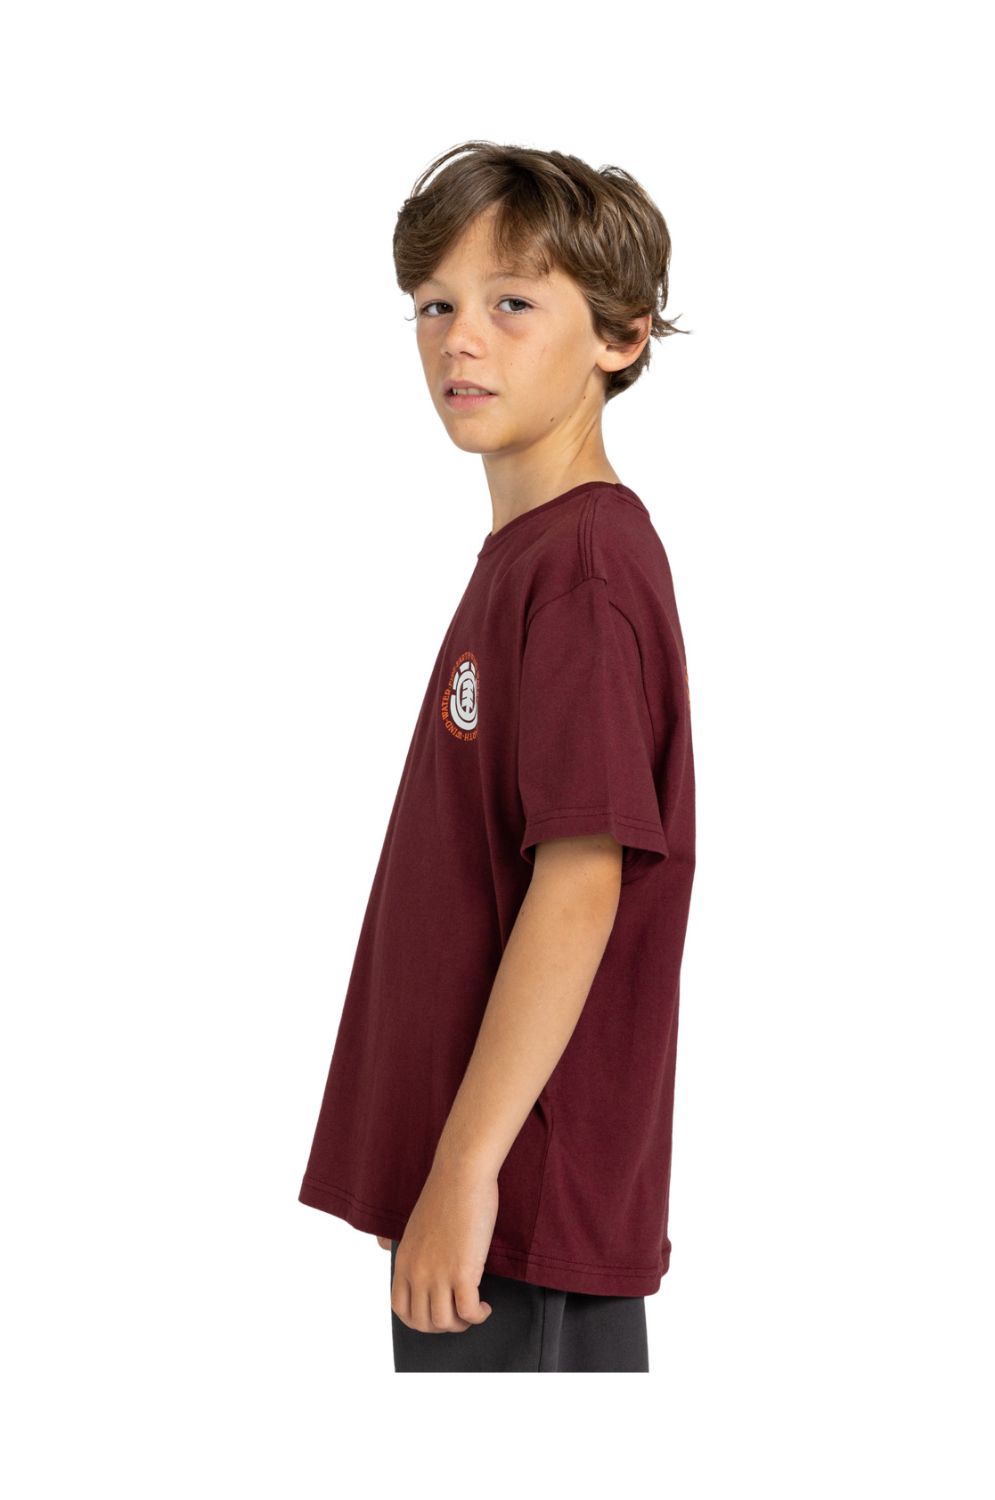 ELEMENT - SEAL TEE YOUTH - TAWNY PORT